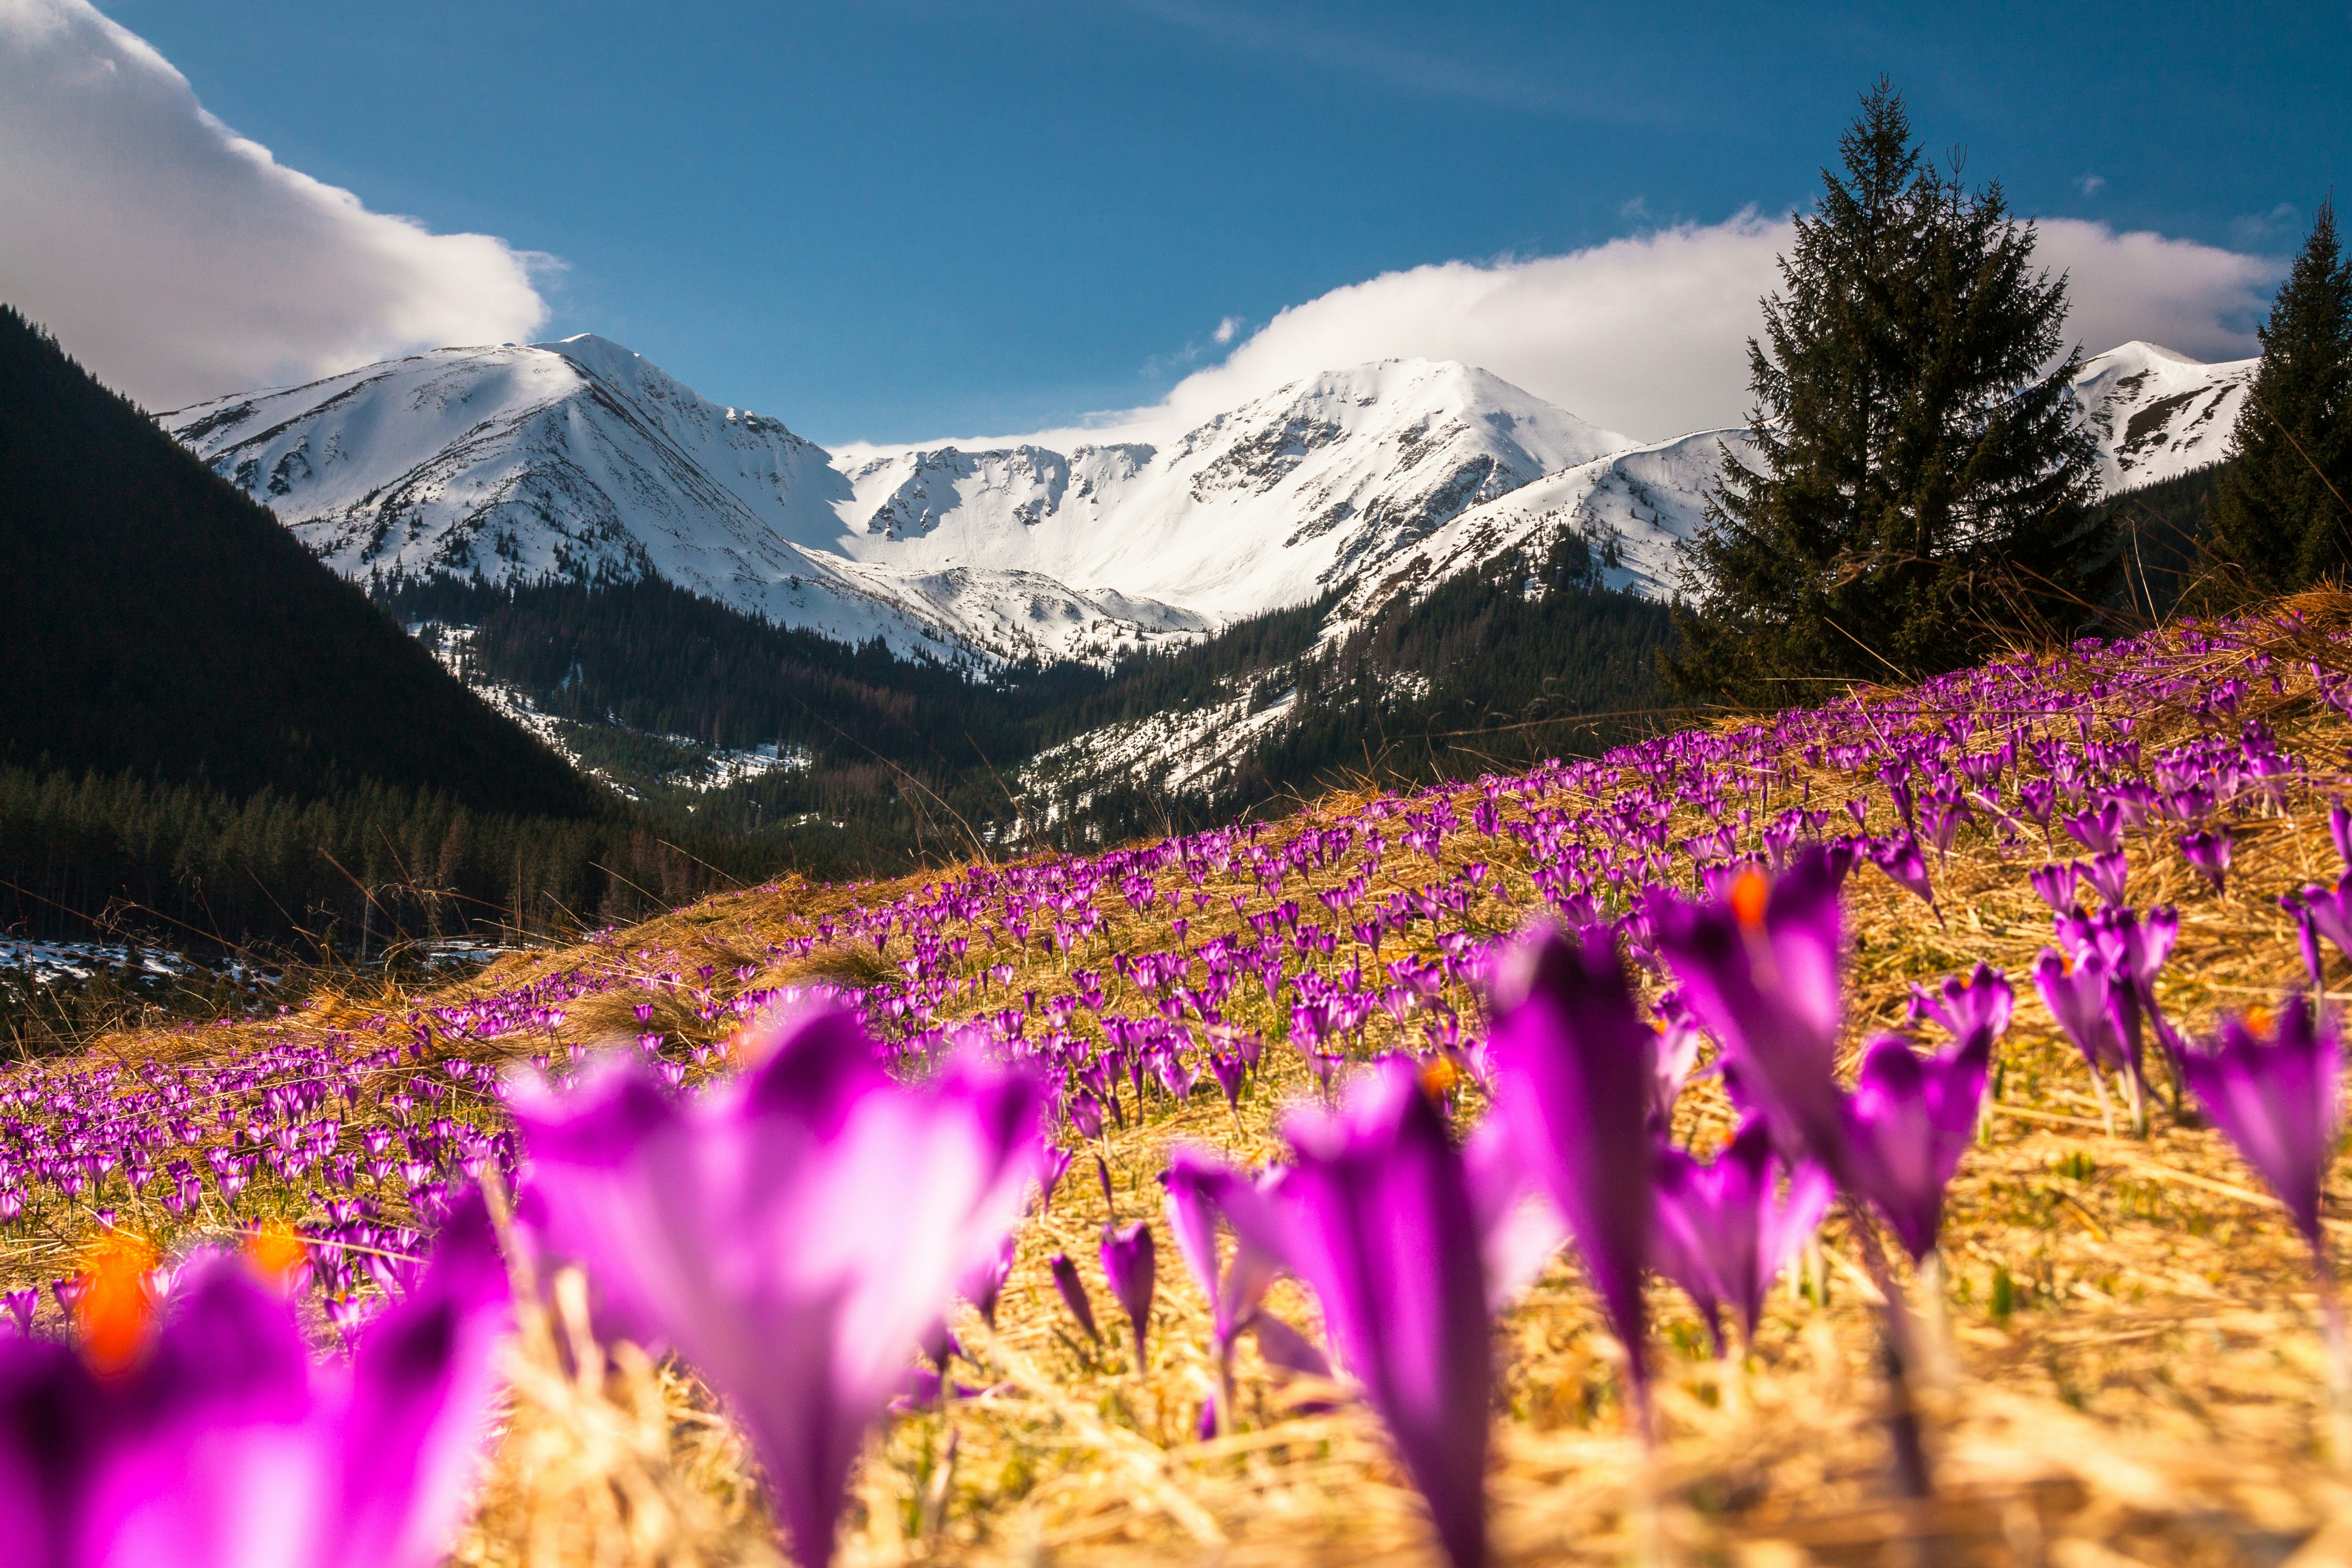 In the fore- and middleground of this photo, fuchsia crocus blossoms temporarily dominate the golden grass field in which they are growing and appear as though they are reaching for the sunlight. In the background, dense clouds against a blue sky hang above a section of mountain range covered with snow and trees in Polana Chochołowska, Kiry, Poland.